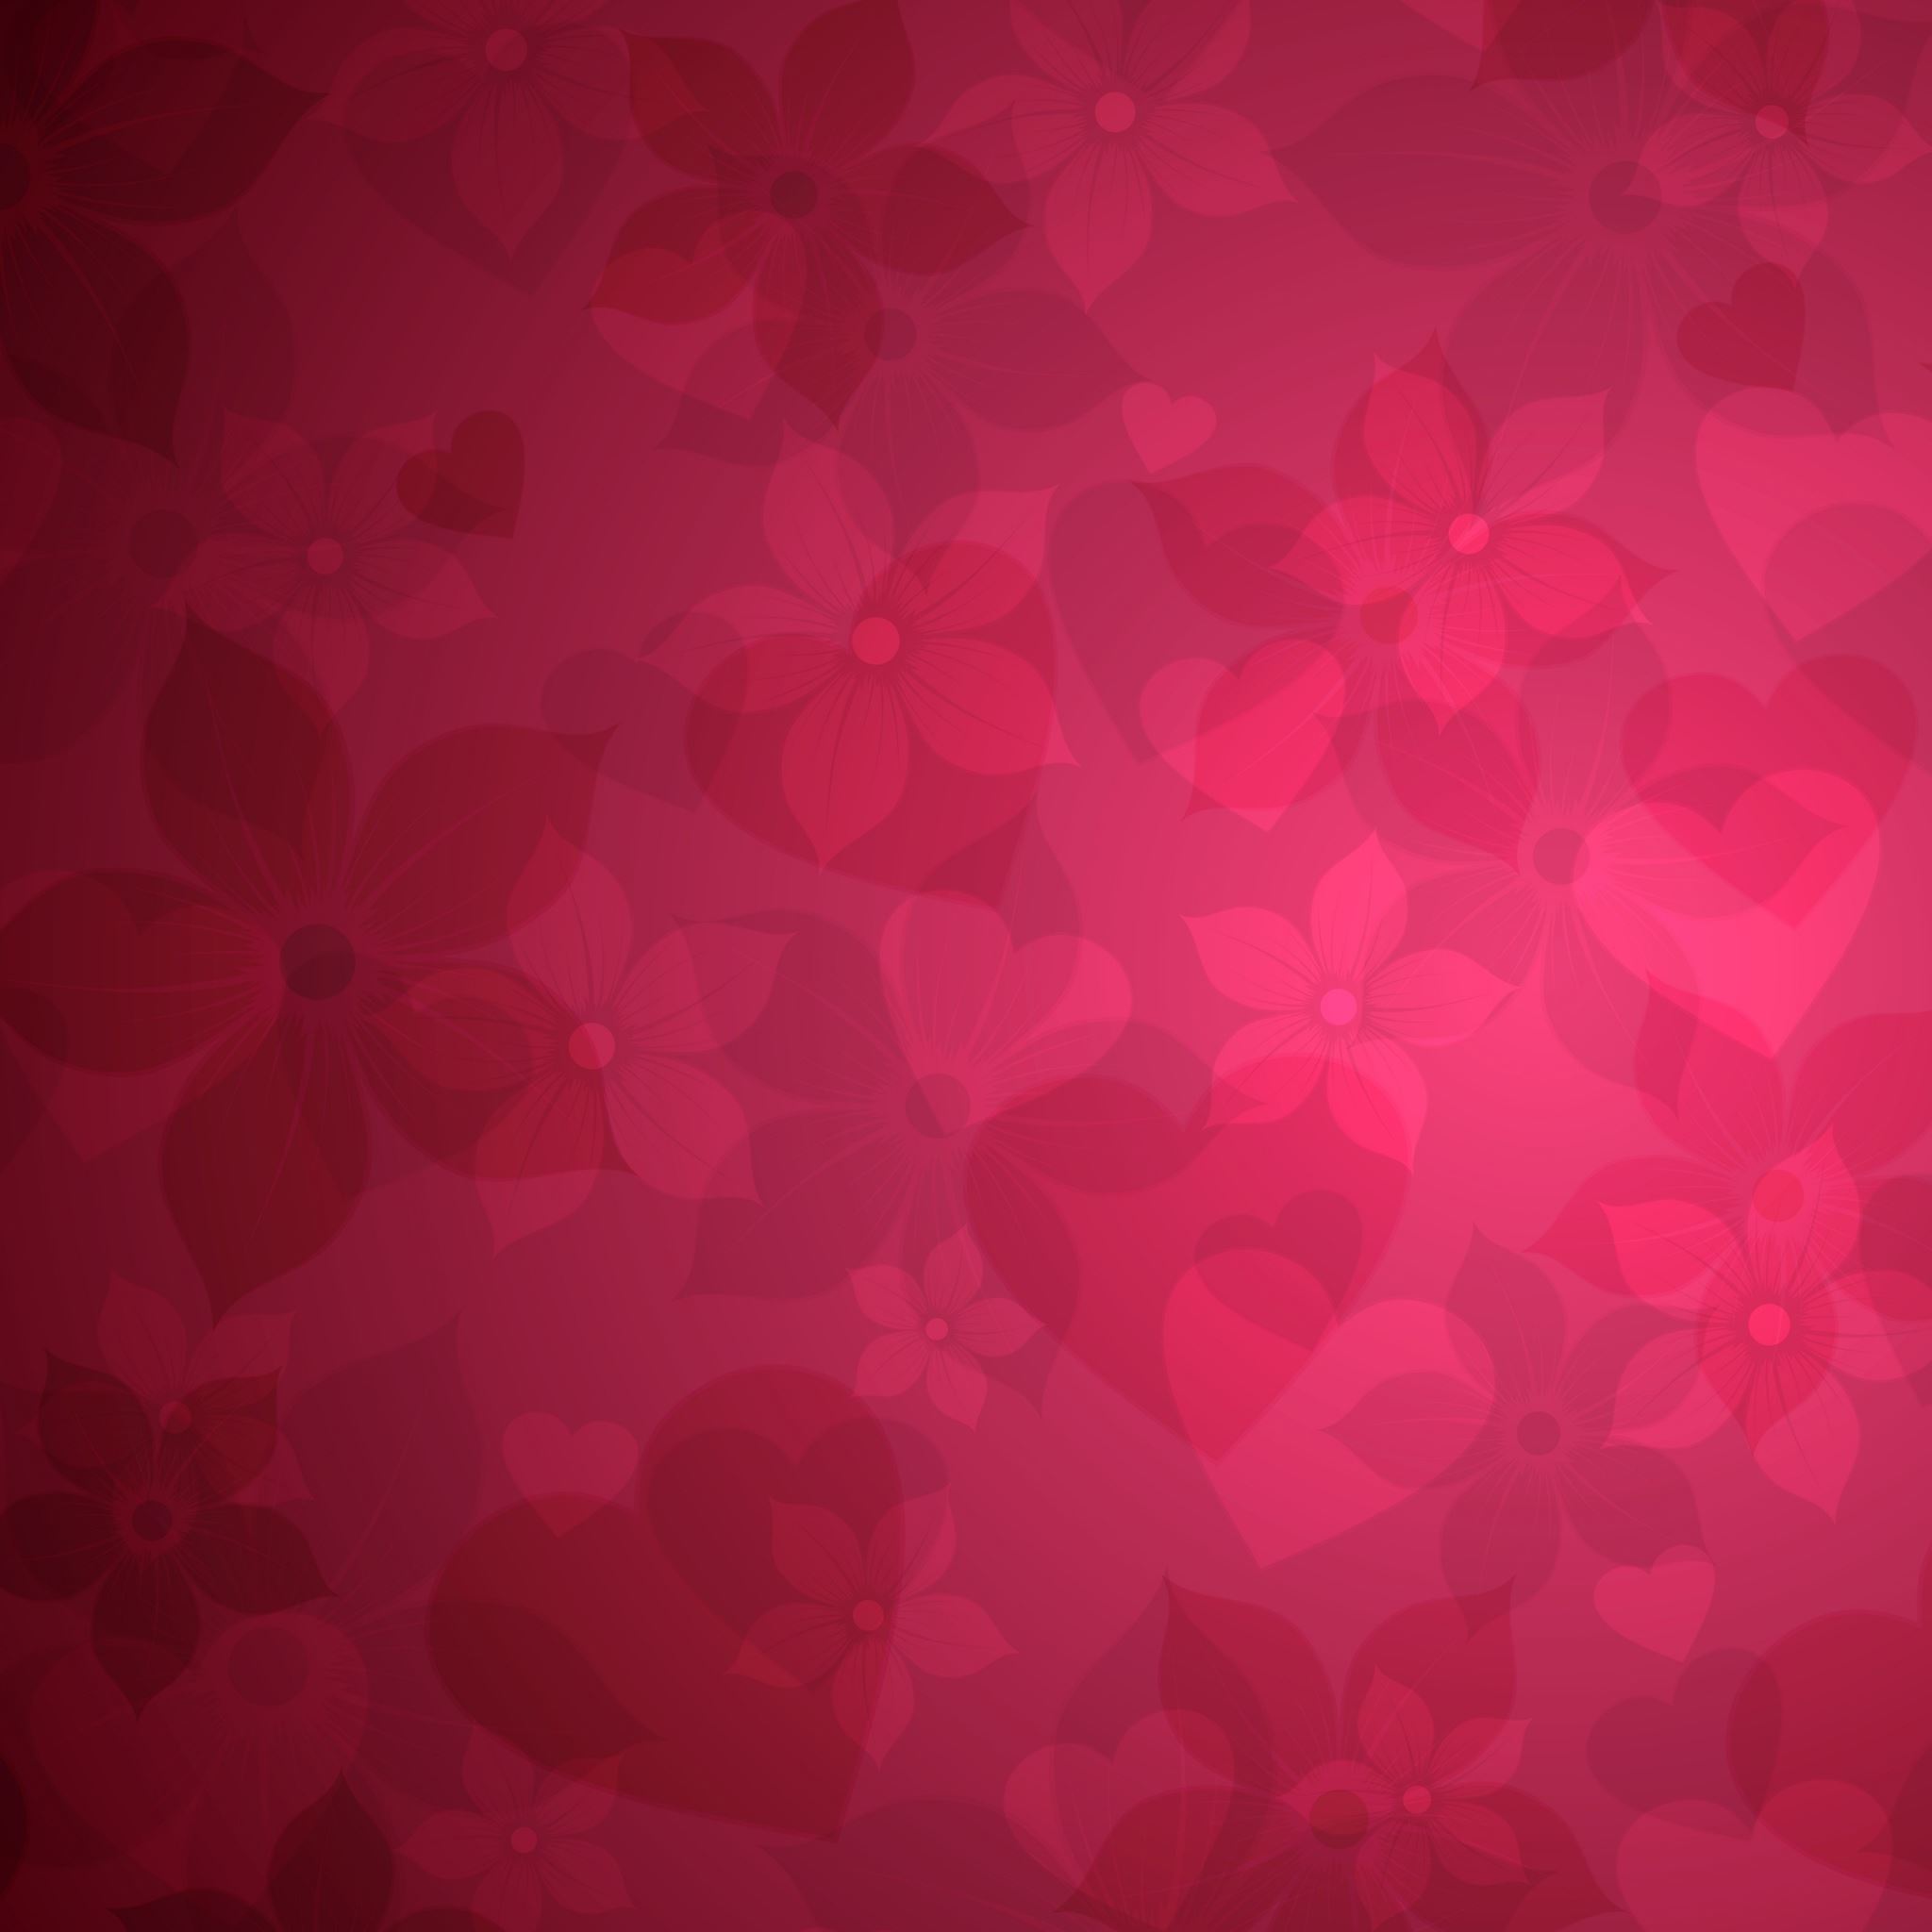 Red floral pattern iPad Air wallpaper 